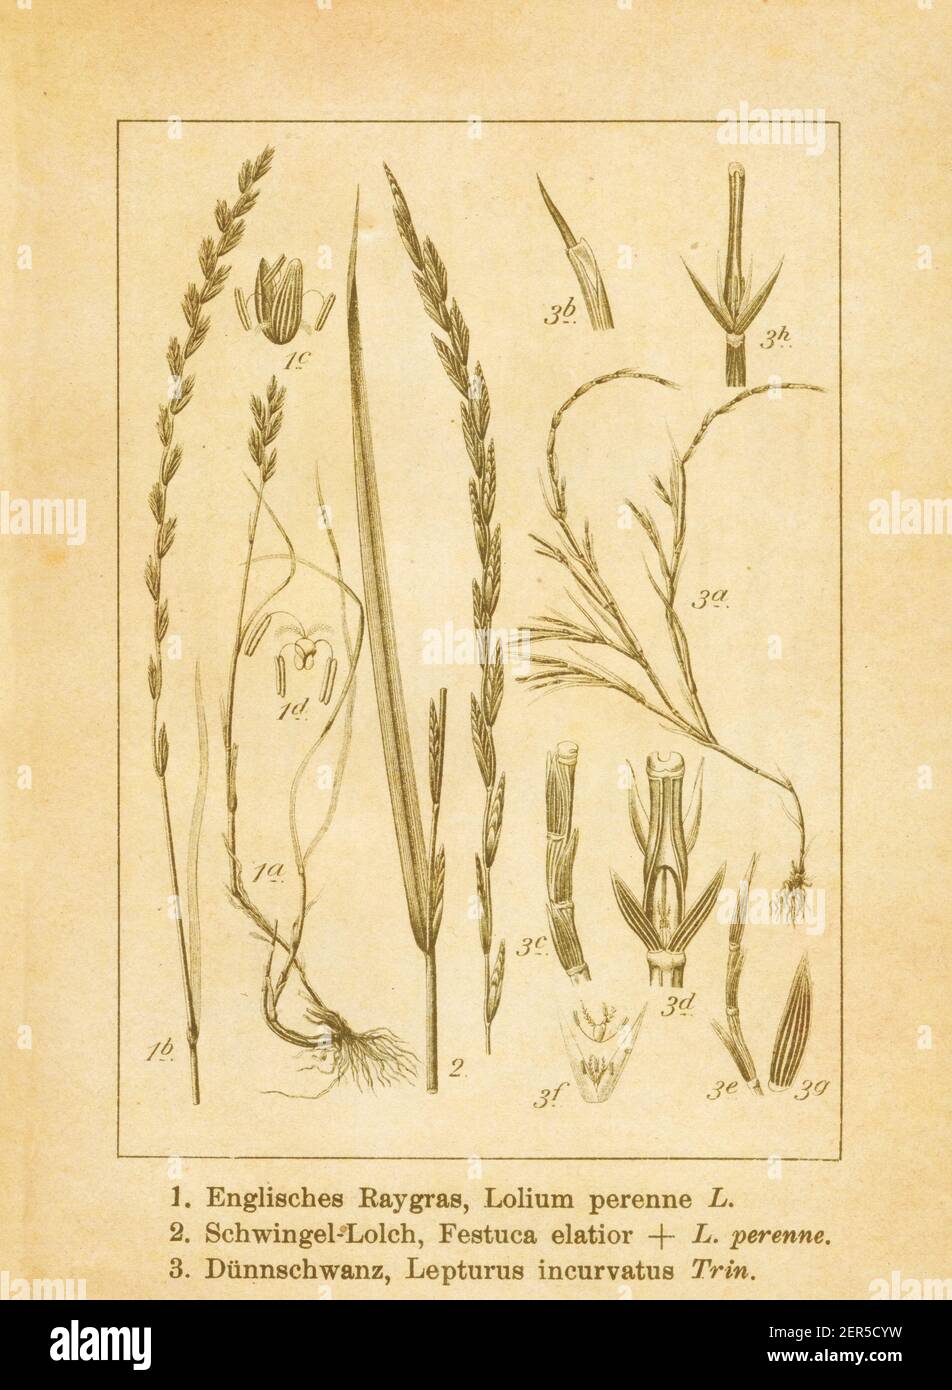 Antique illustration of lolium perenne (also known as perennial ryegrass), festuca elatior (also known as tall fescue) and lepturus incurvatus (also k Stock Photo